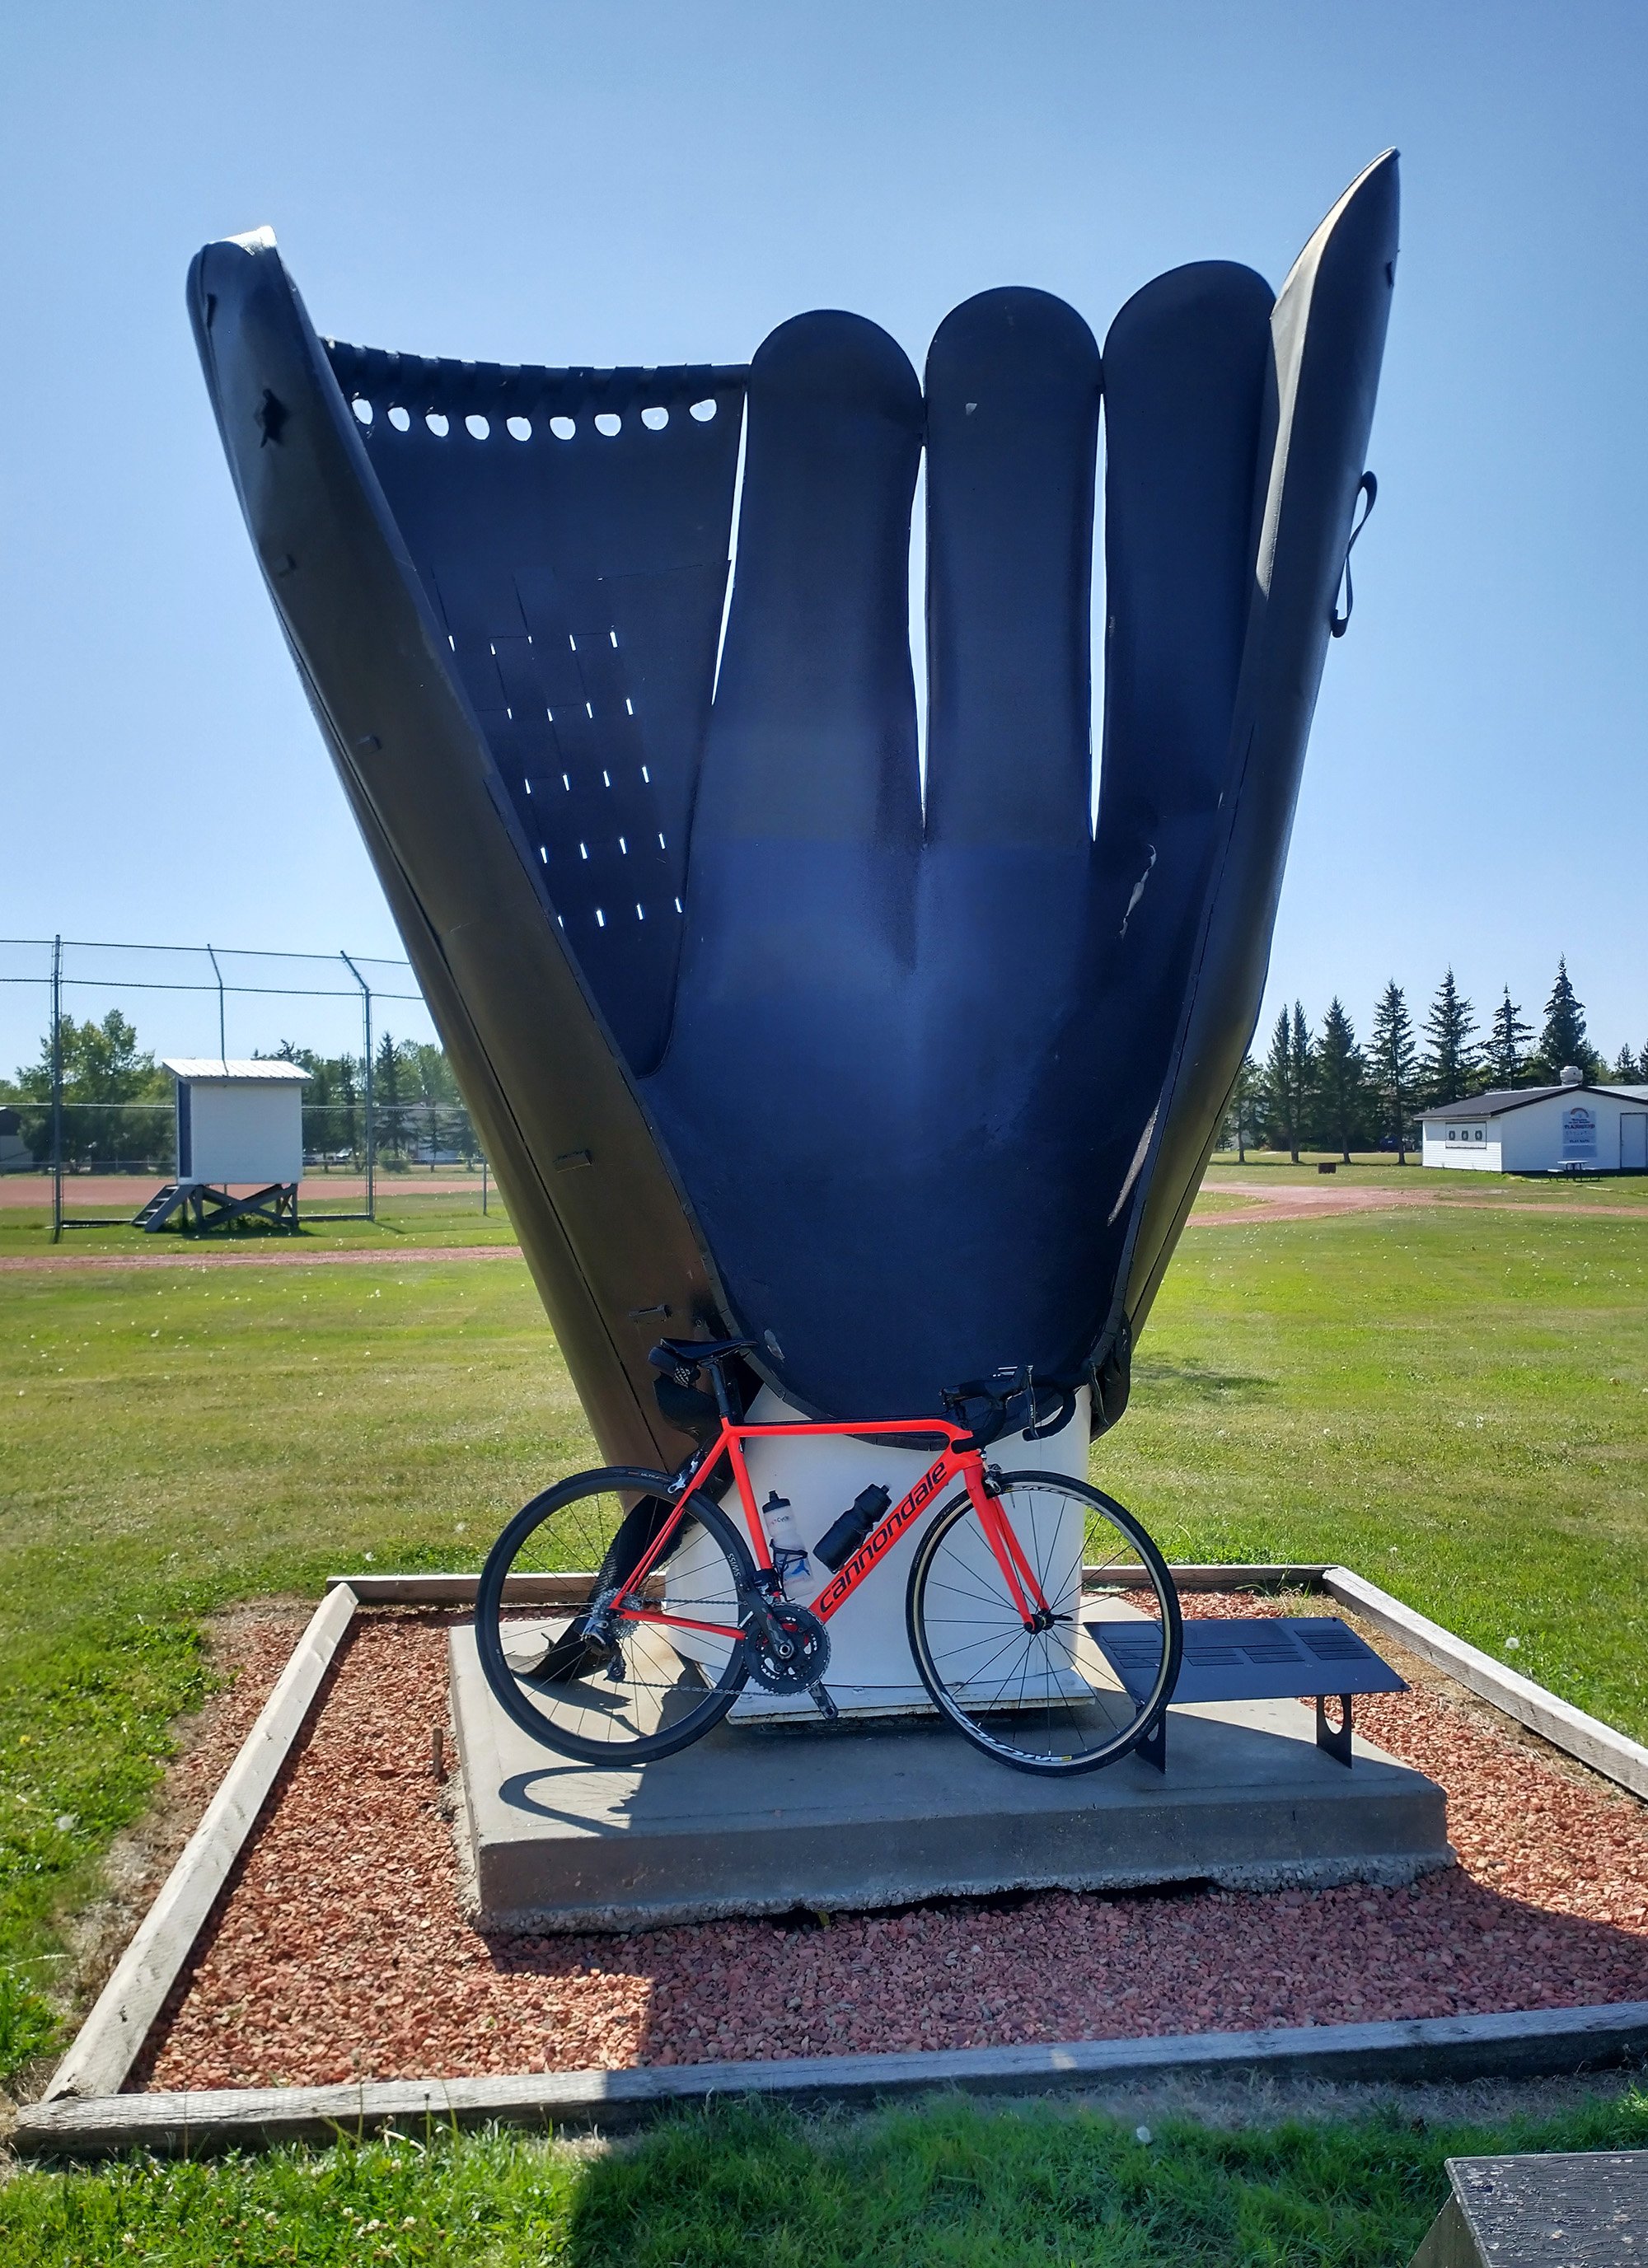 Largest Baseball Glove, in Heisler, BC. Super mega dump town. Why is this here.